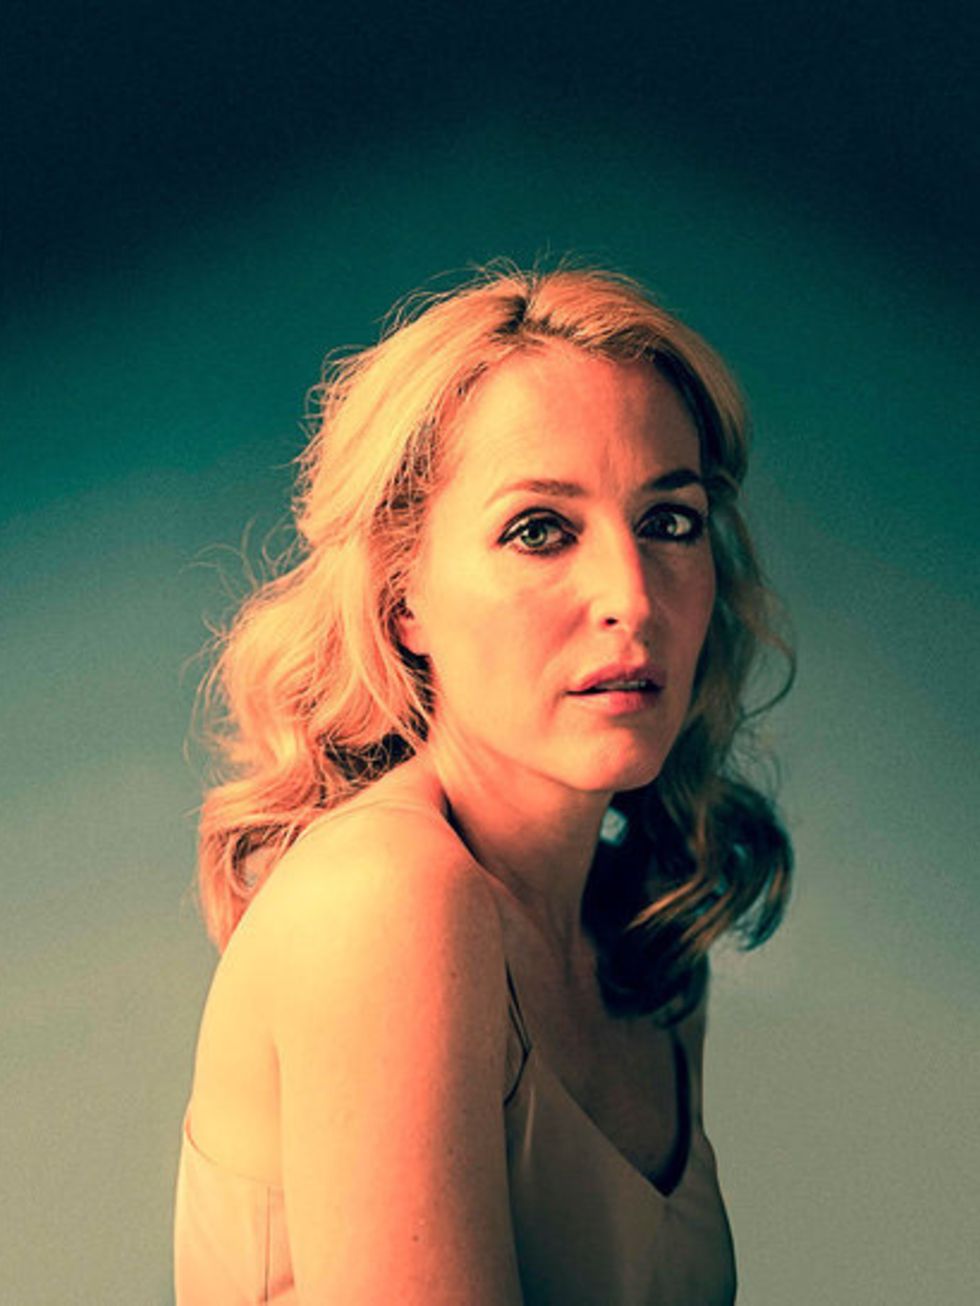 THEATRE: A Streetcar Named Desire

Passions rage and the heat sizzles in this adaptation of Tennessee Williams stormy classic.

Gillian Anderson plays the unforgettable Blance DuBois in a new staging at the Young Vic, running from the 23 July to the 19 S